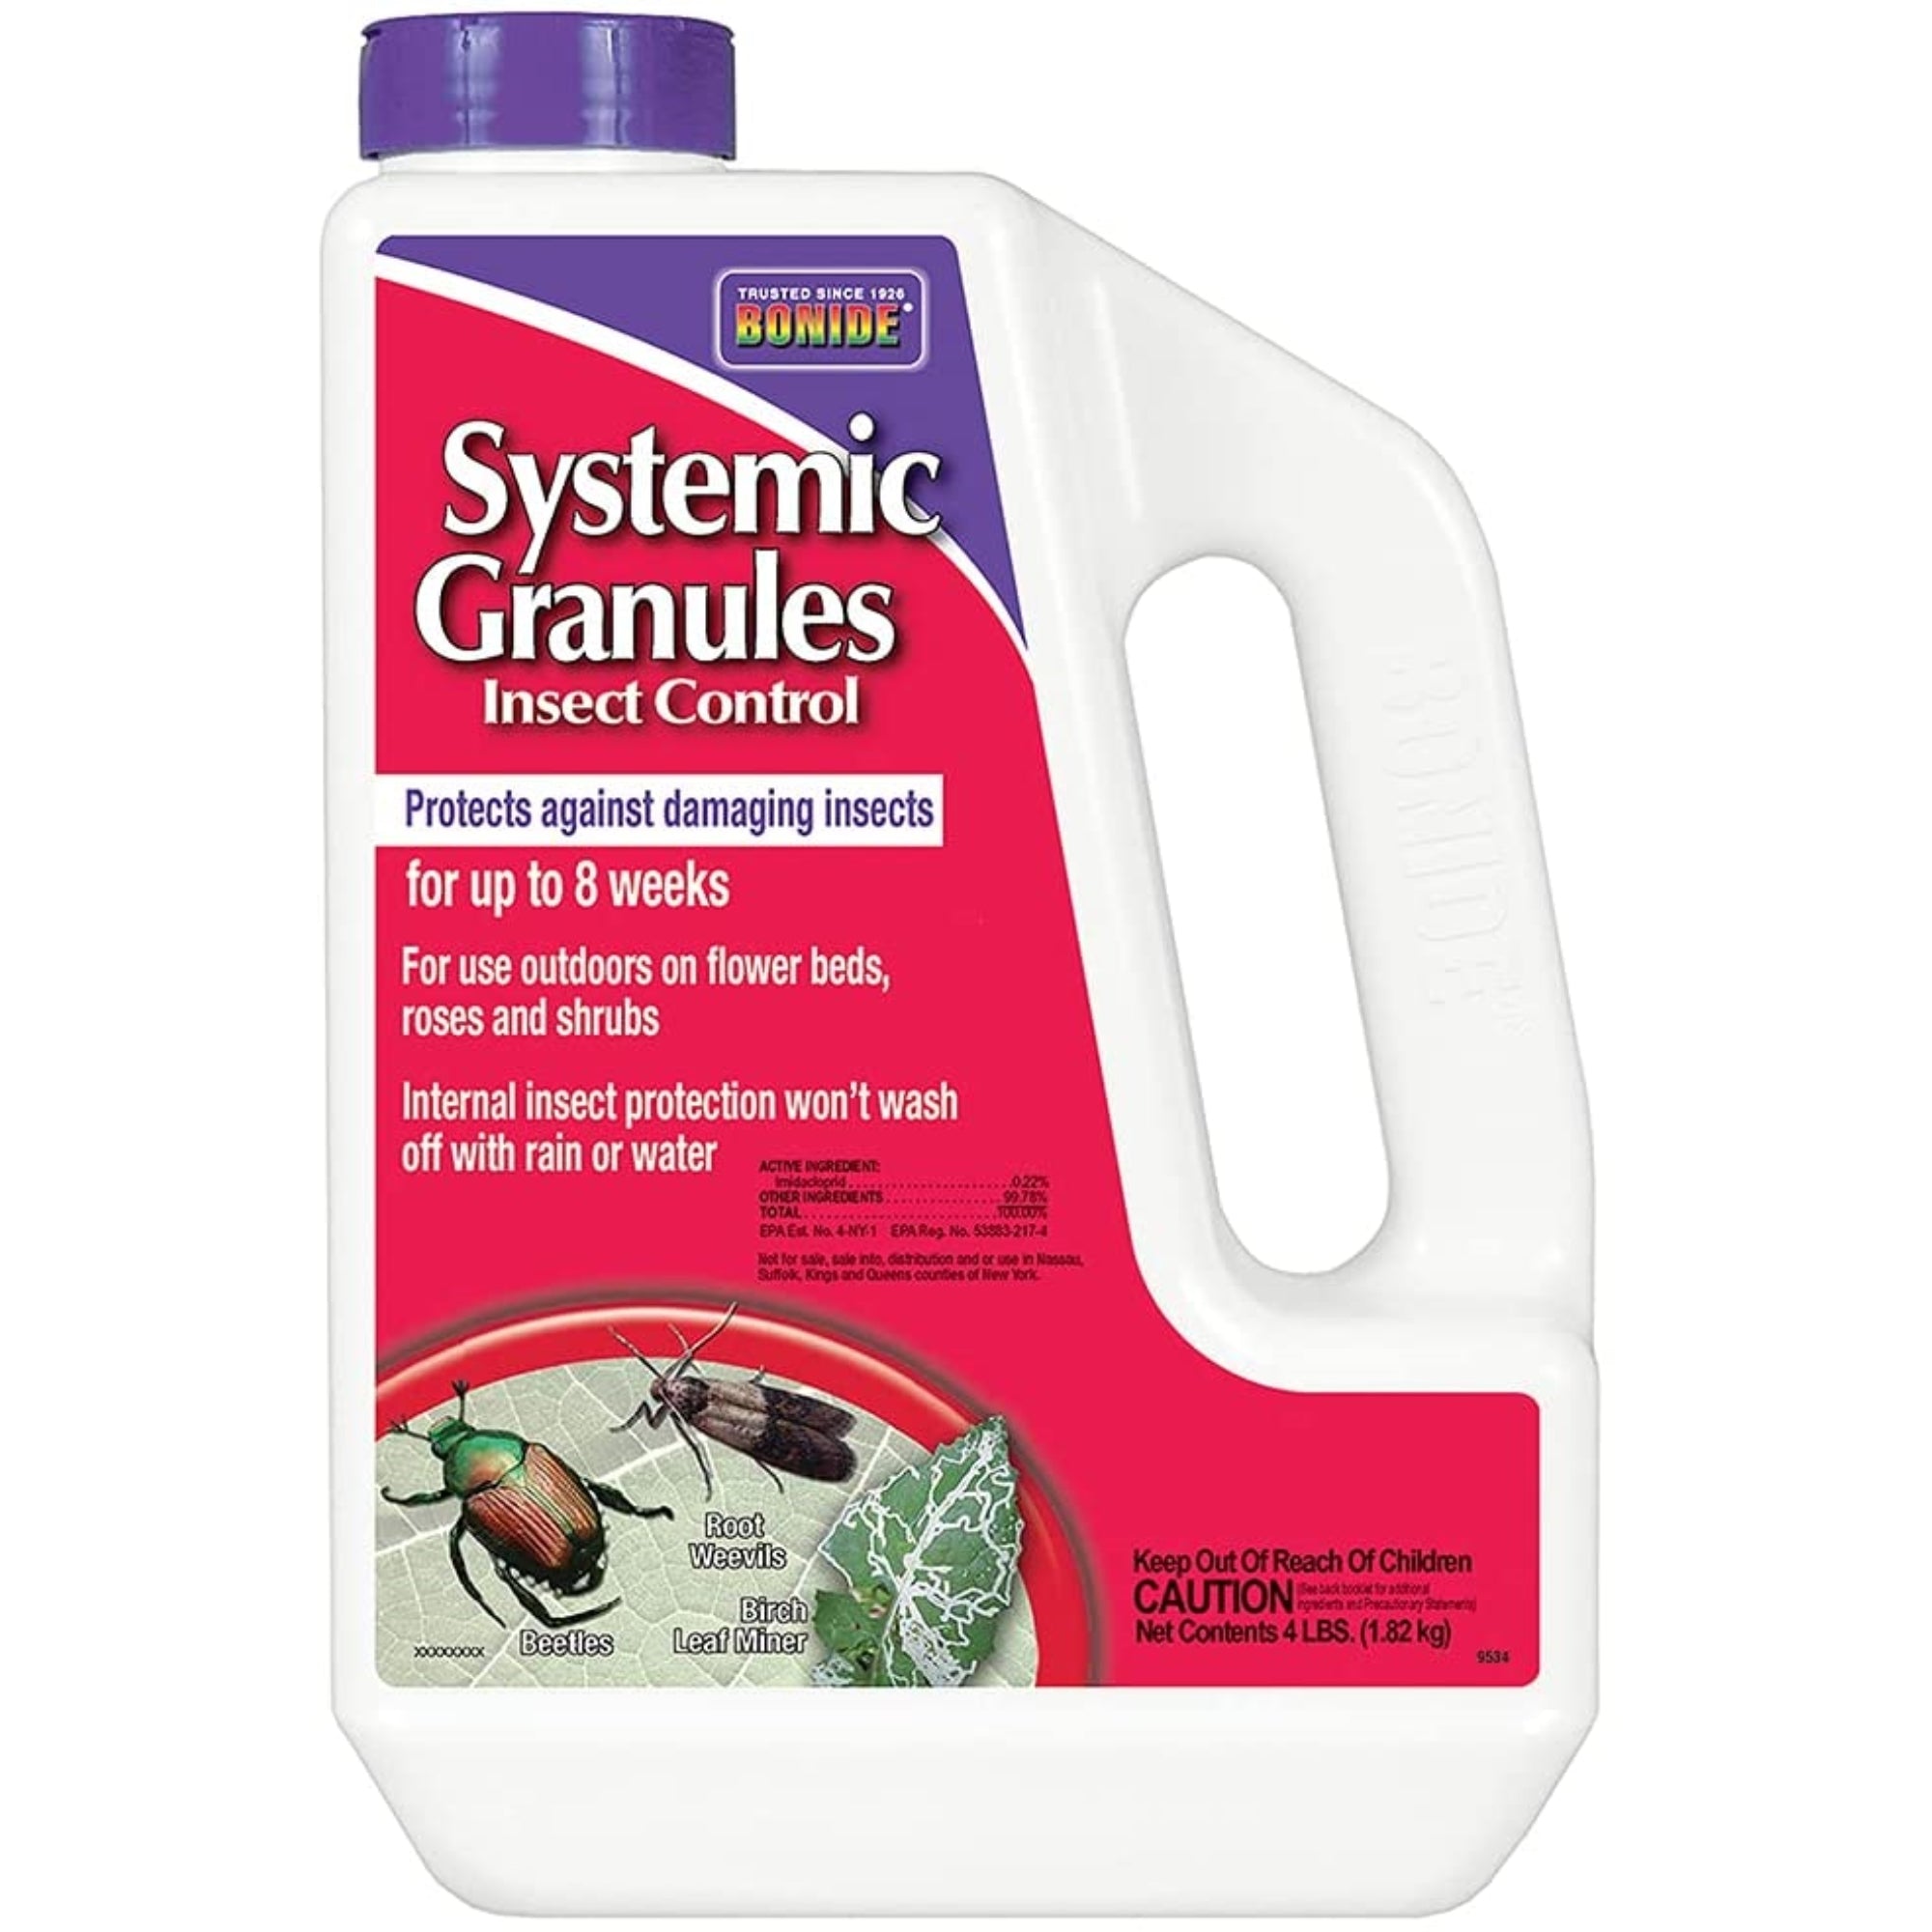 Bonide (#BND9534) Systemic Insect Control, Granular - Shaker Canister, 4#